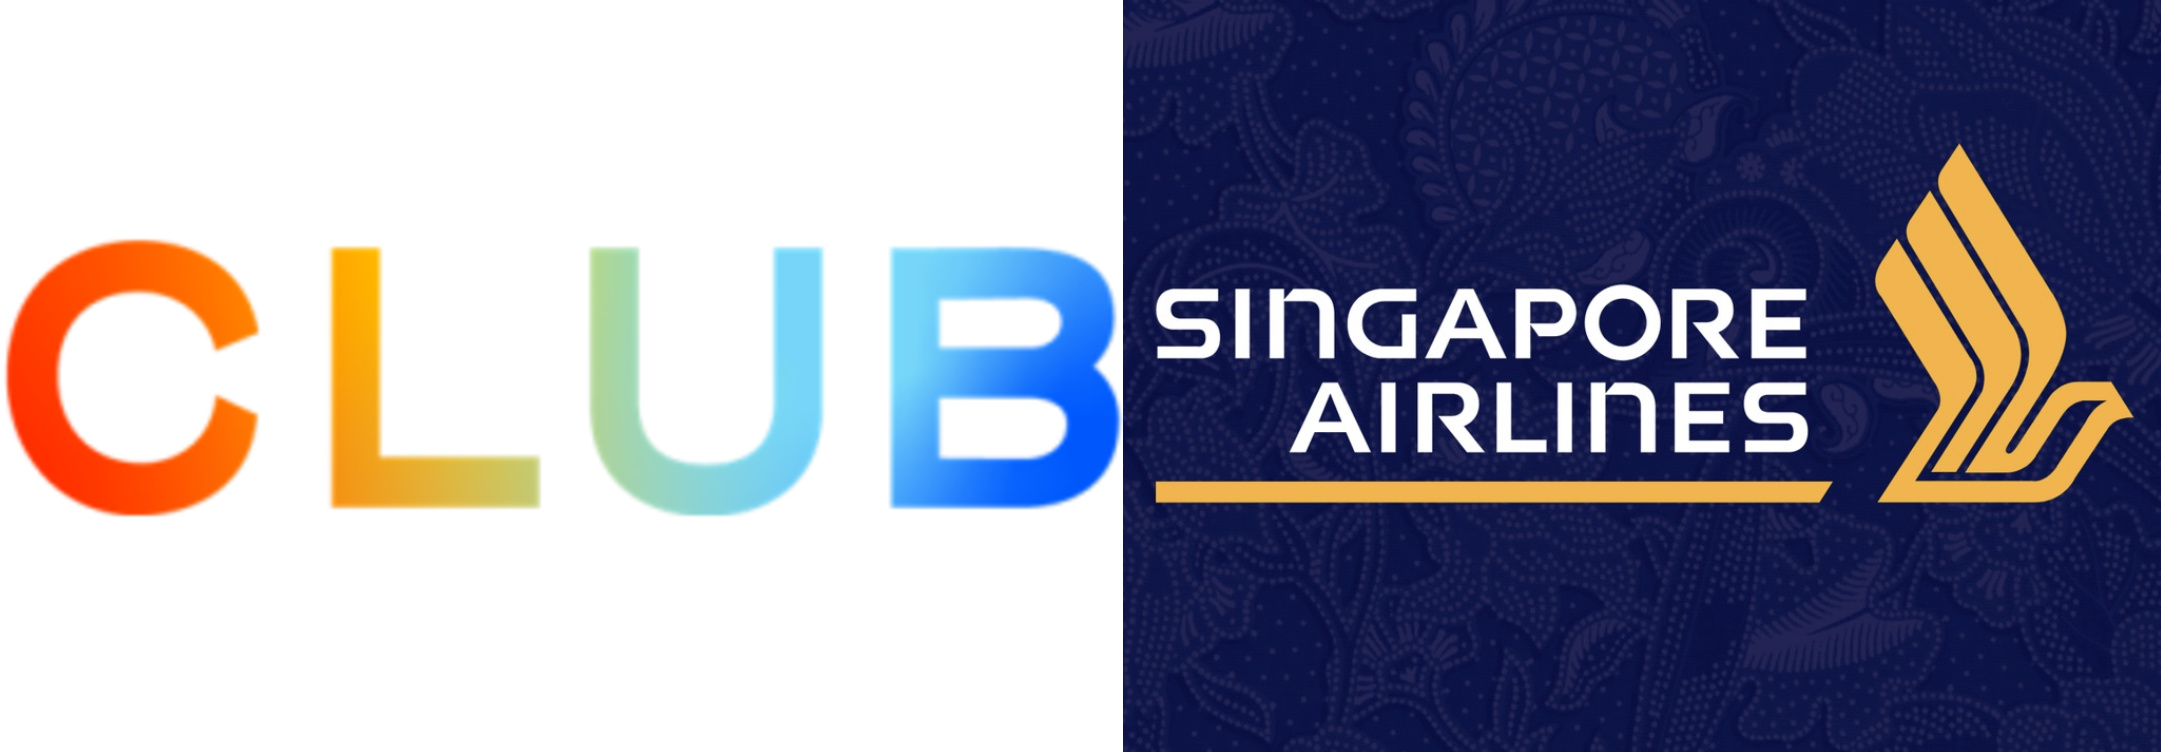 The Club and Singapore Airlines Logo